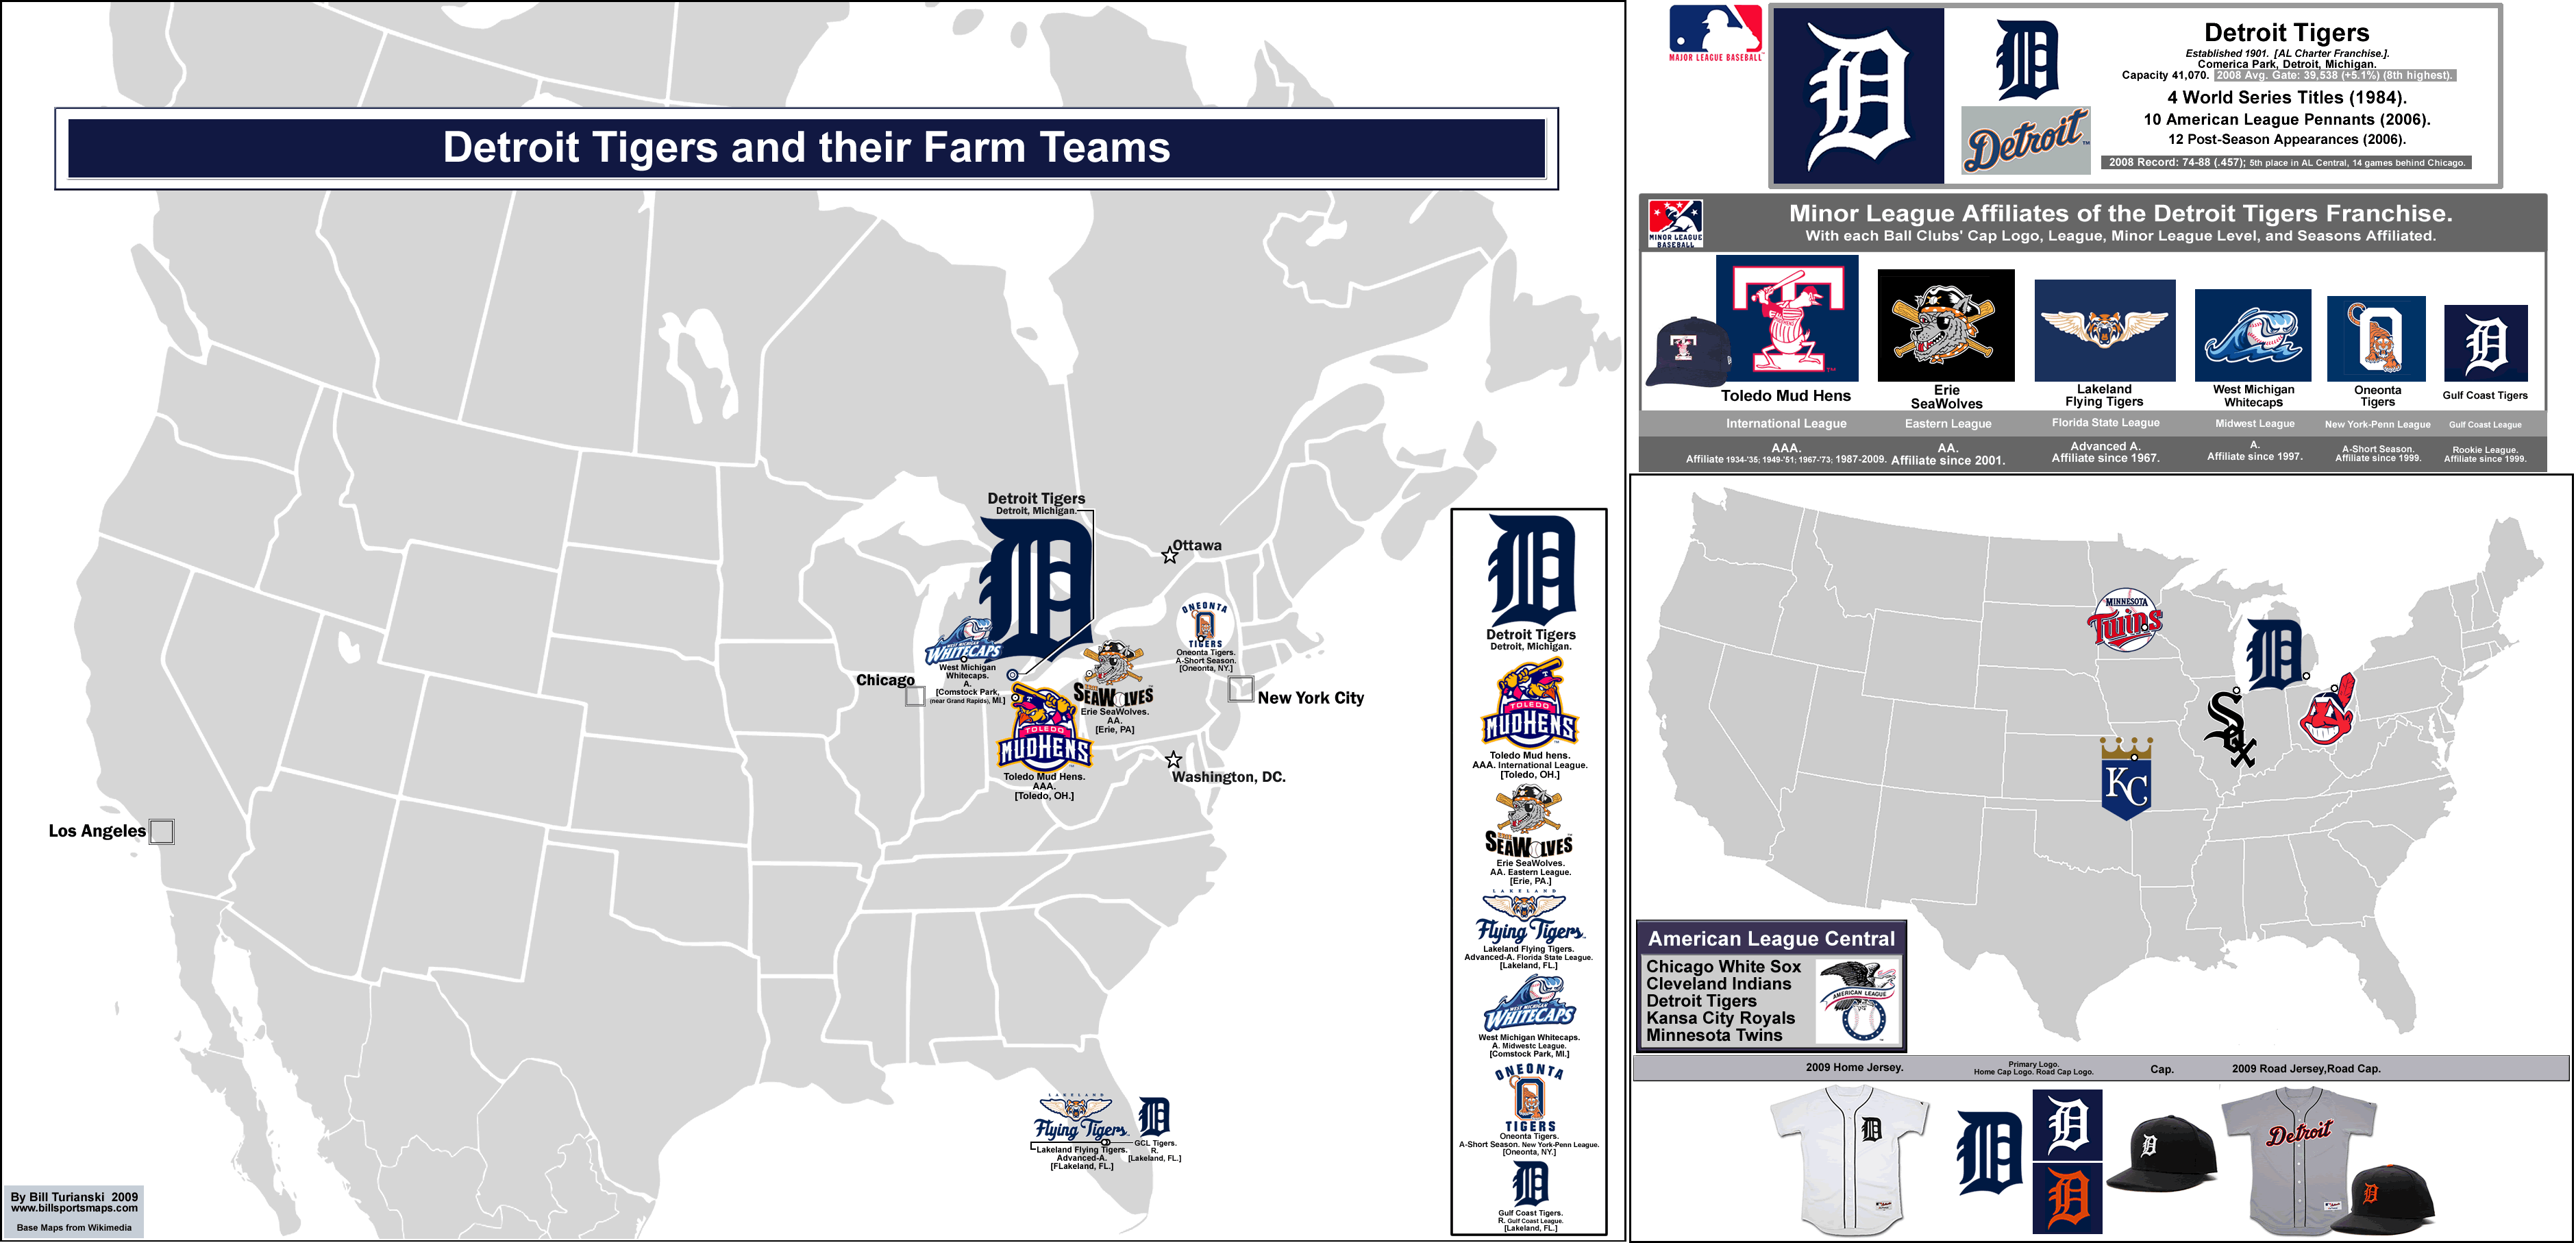 MLB Ball Clubs and their Minor League Affiliates: the Detroit Tigers. «